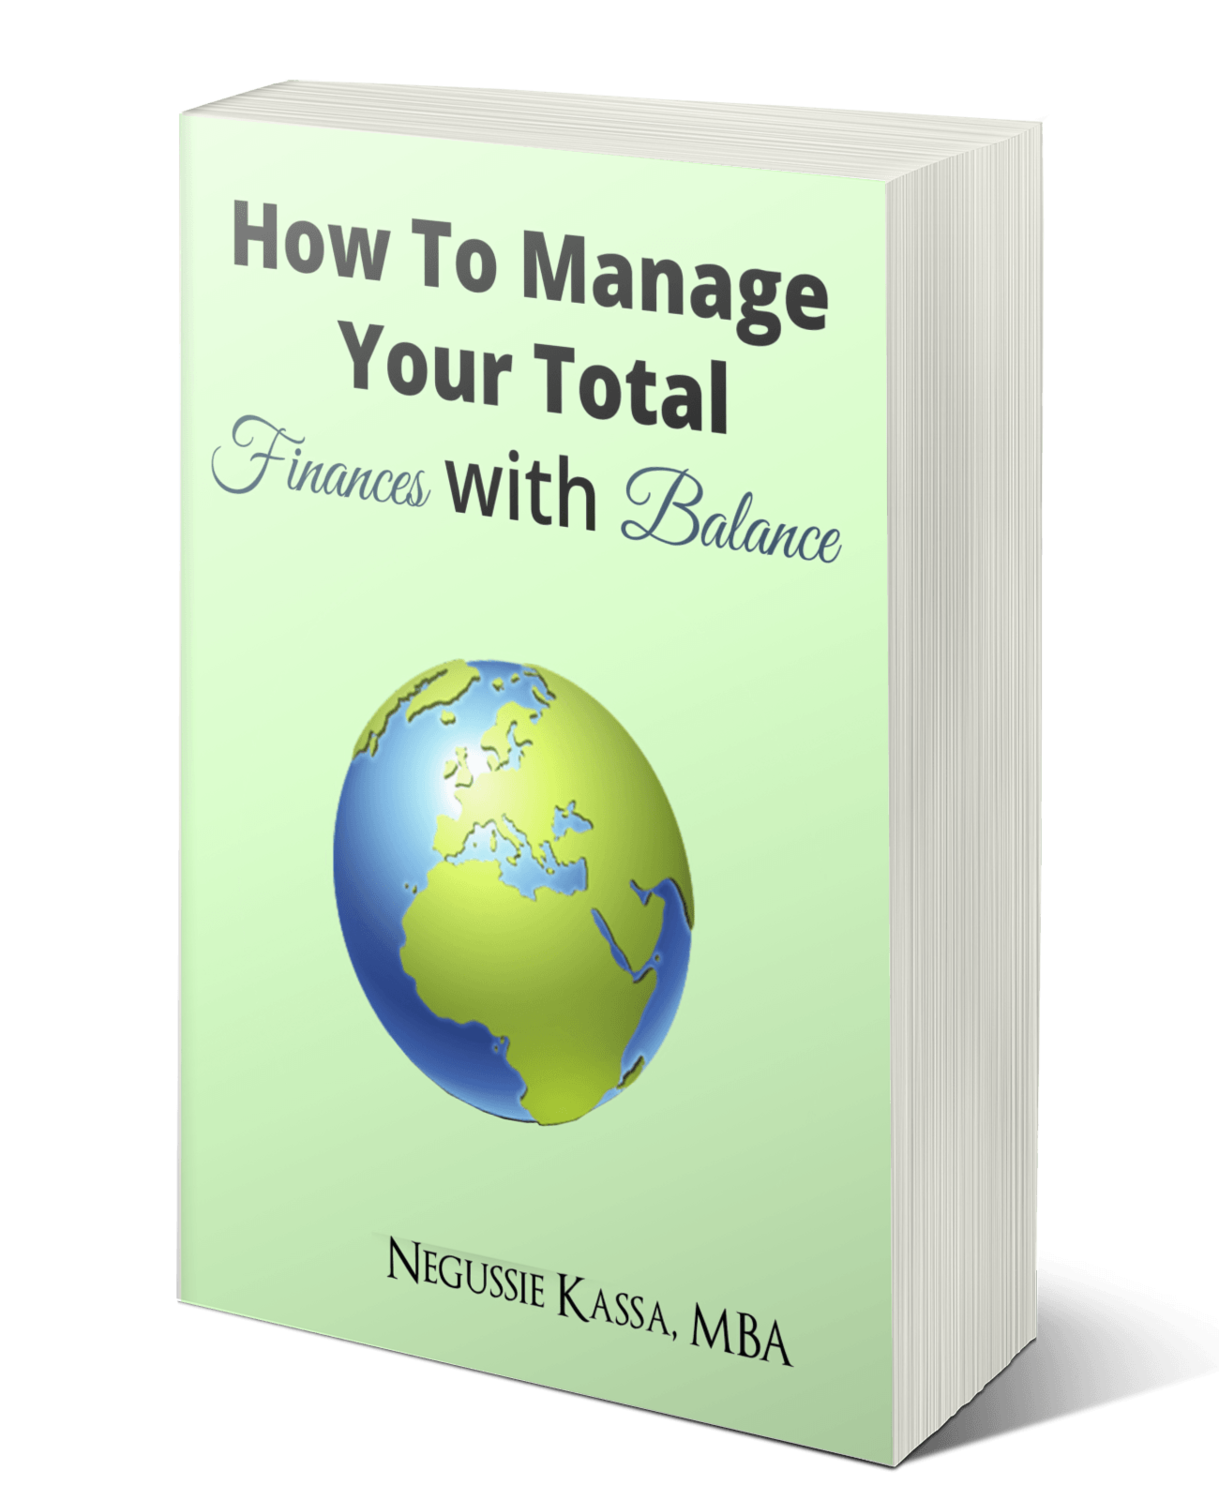 How to Manage Your Total Finances with Balance